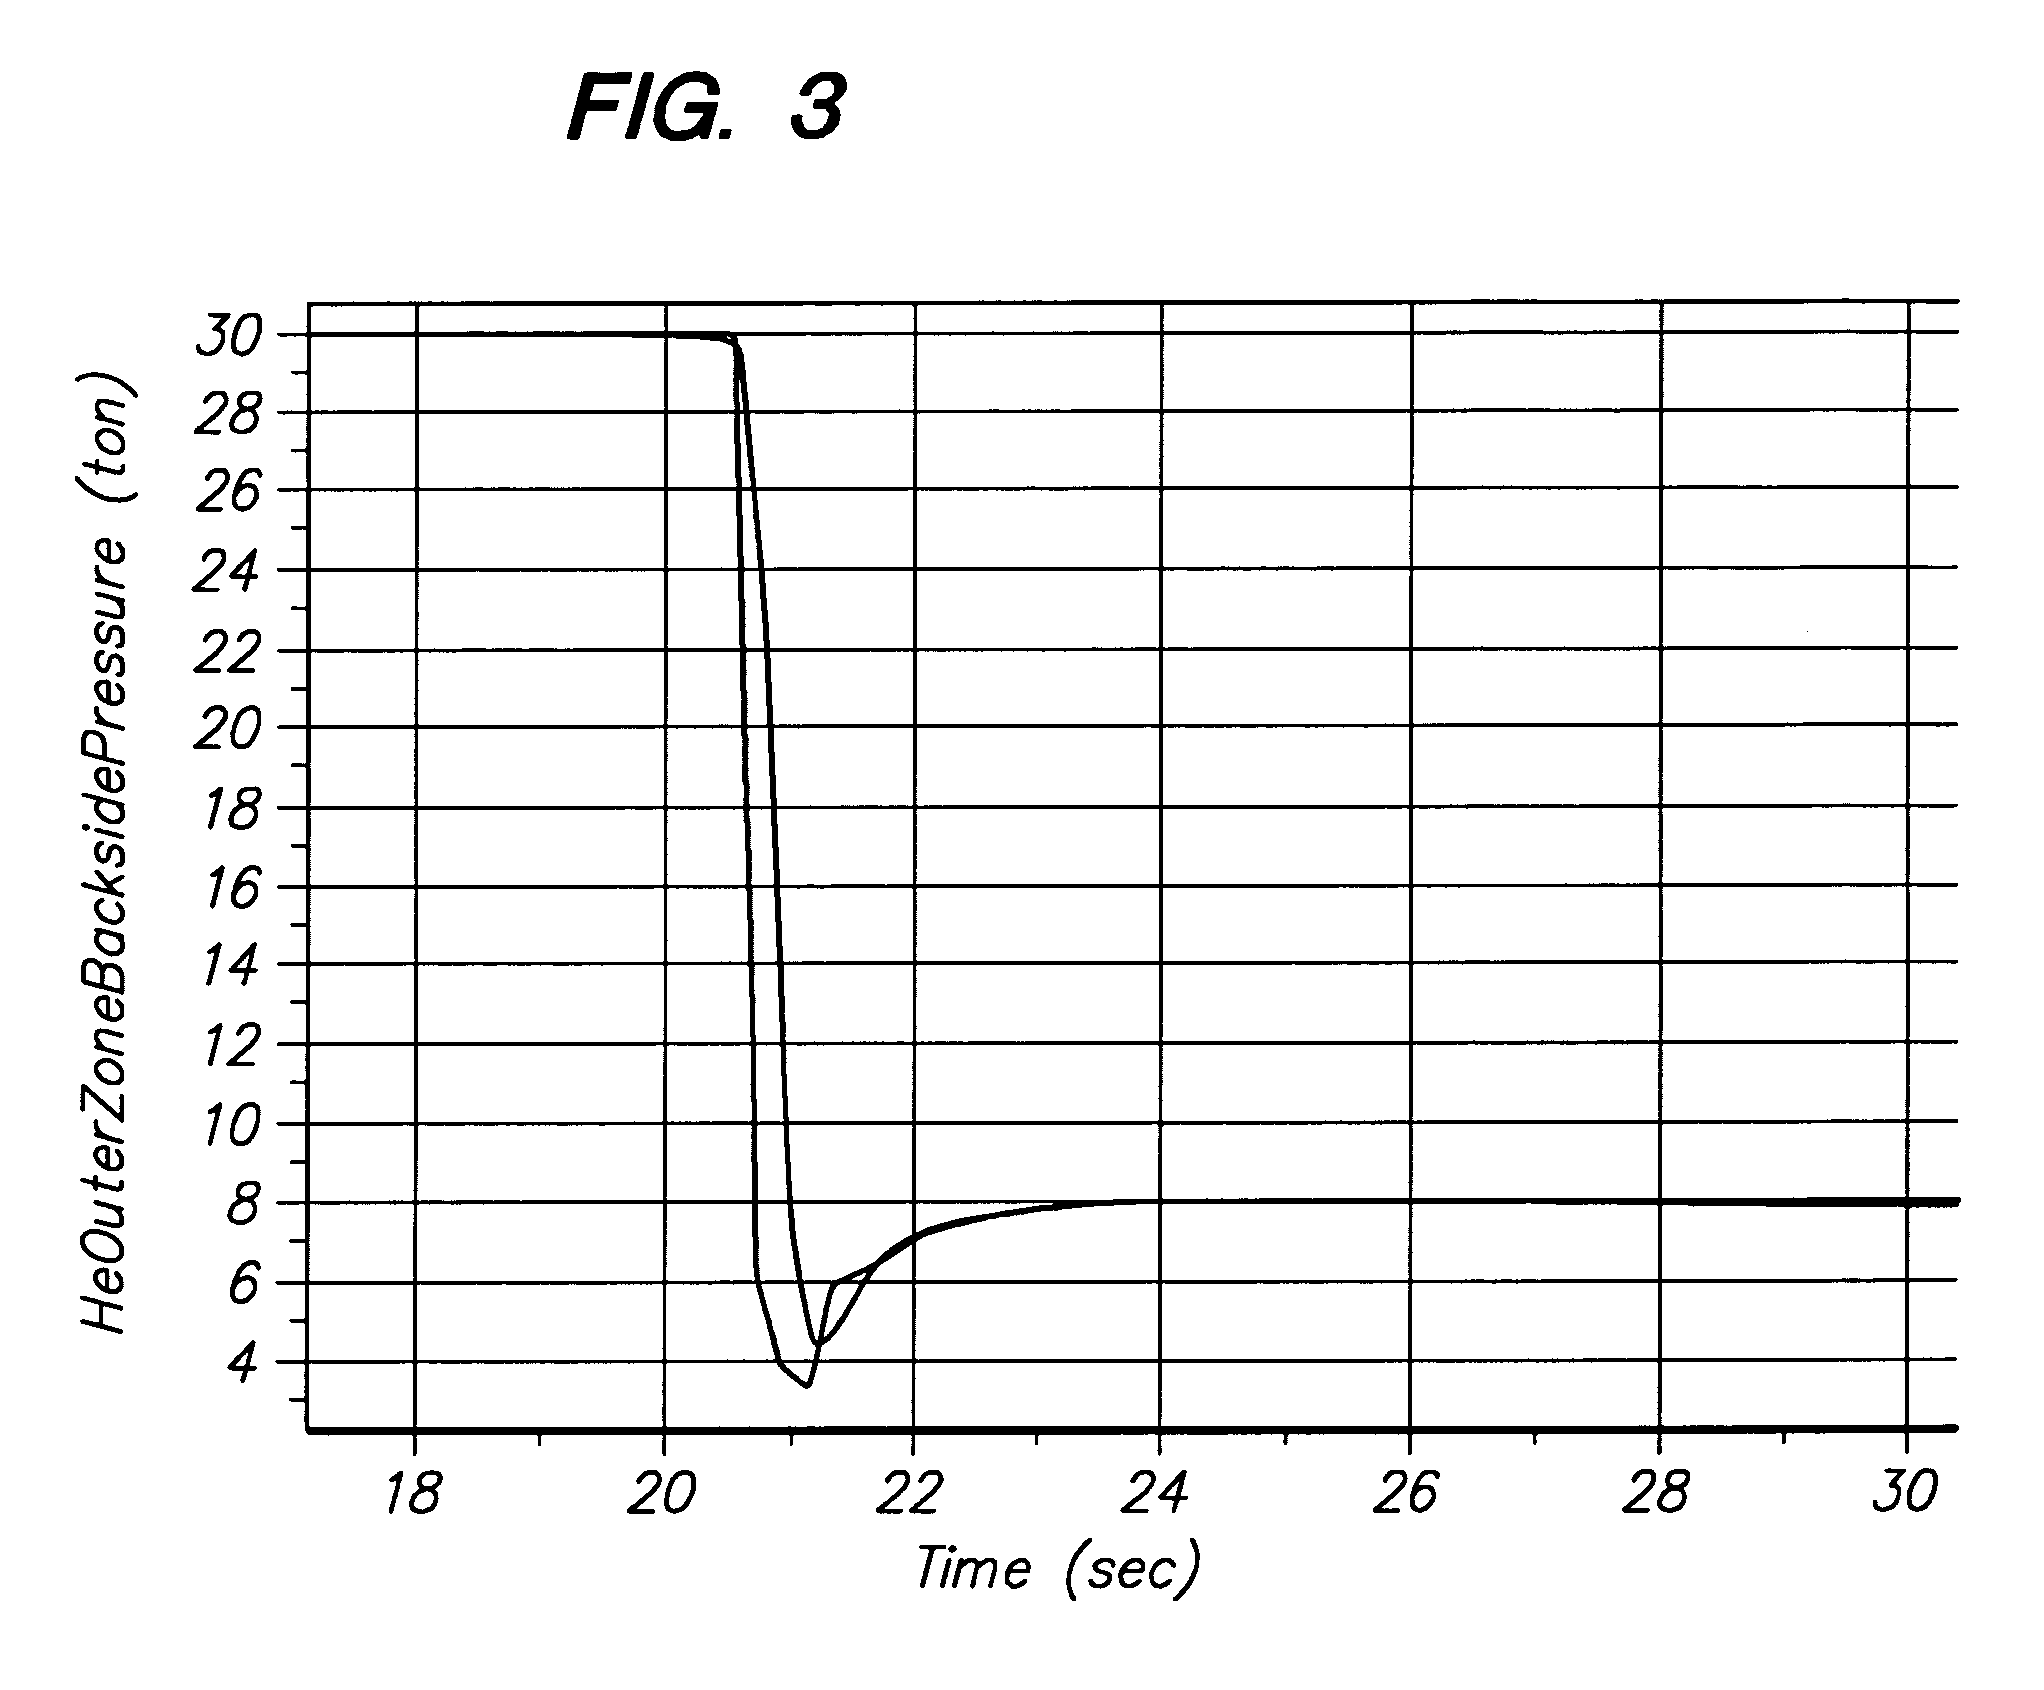 Multiple zone gas distribution apparatus for thermal control of semiconductor wafer